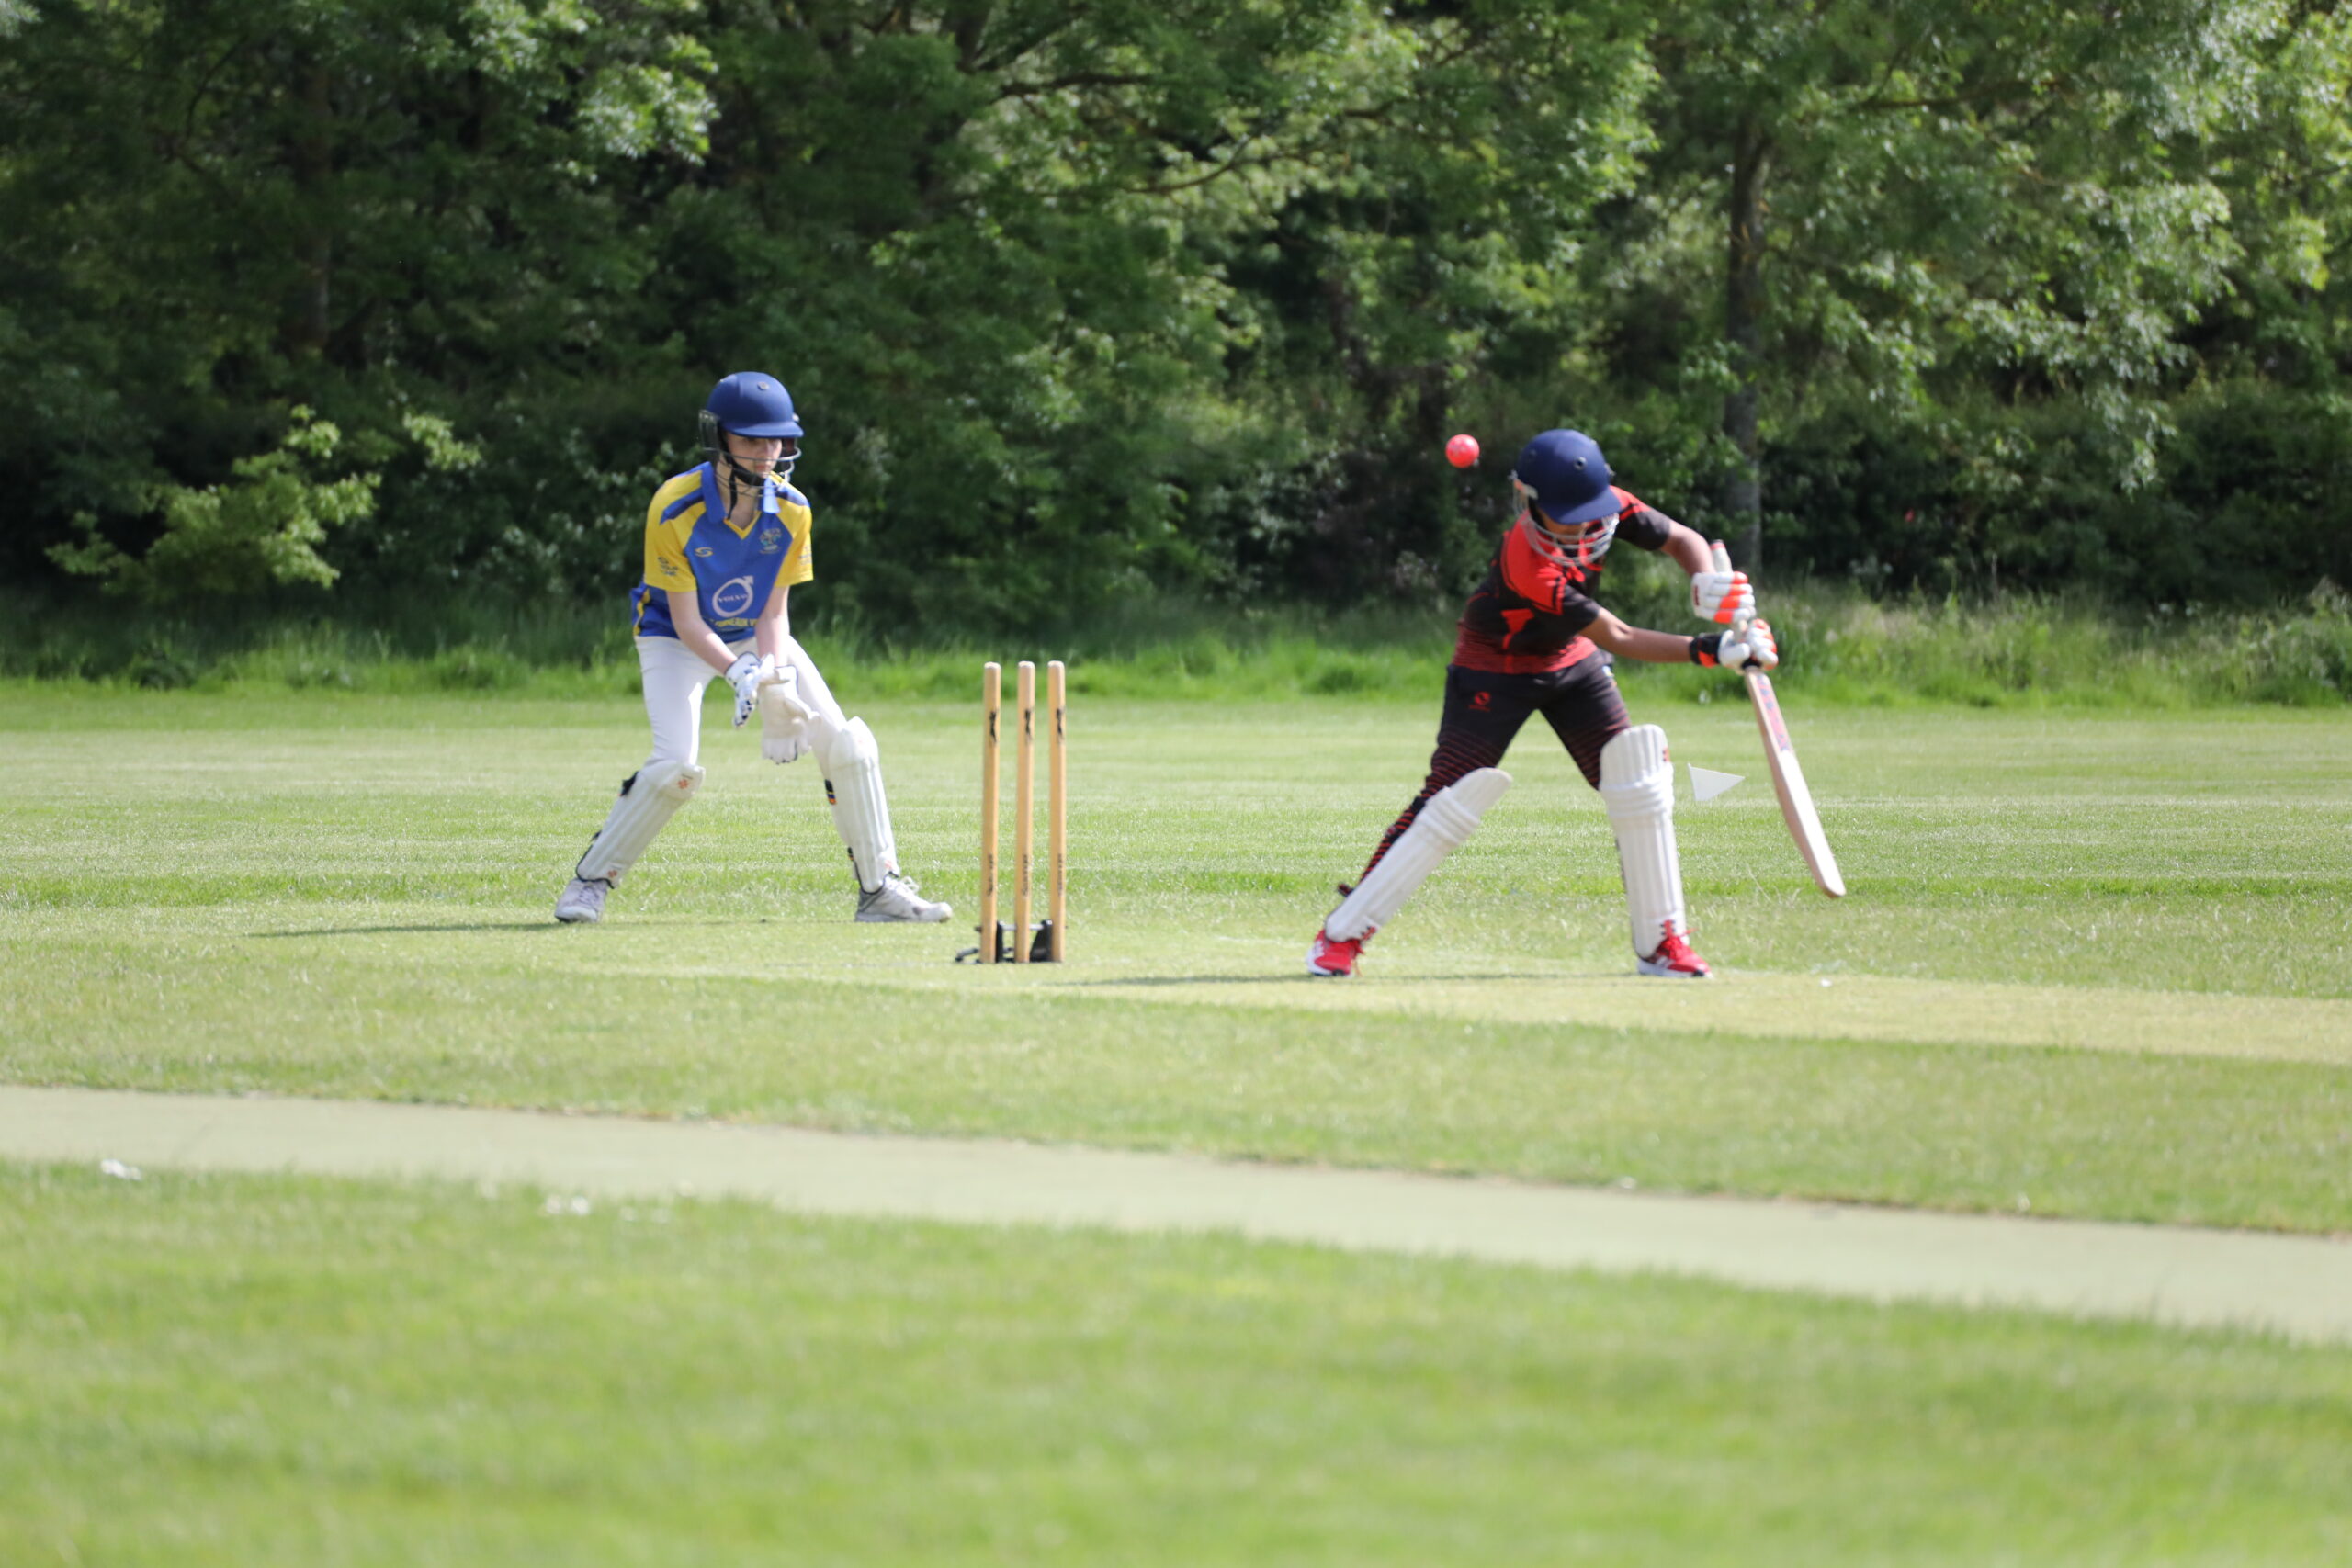 Tali Hatcher batting for Guildford City Cricket Youth Project against Pirbright CC